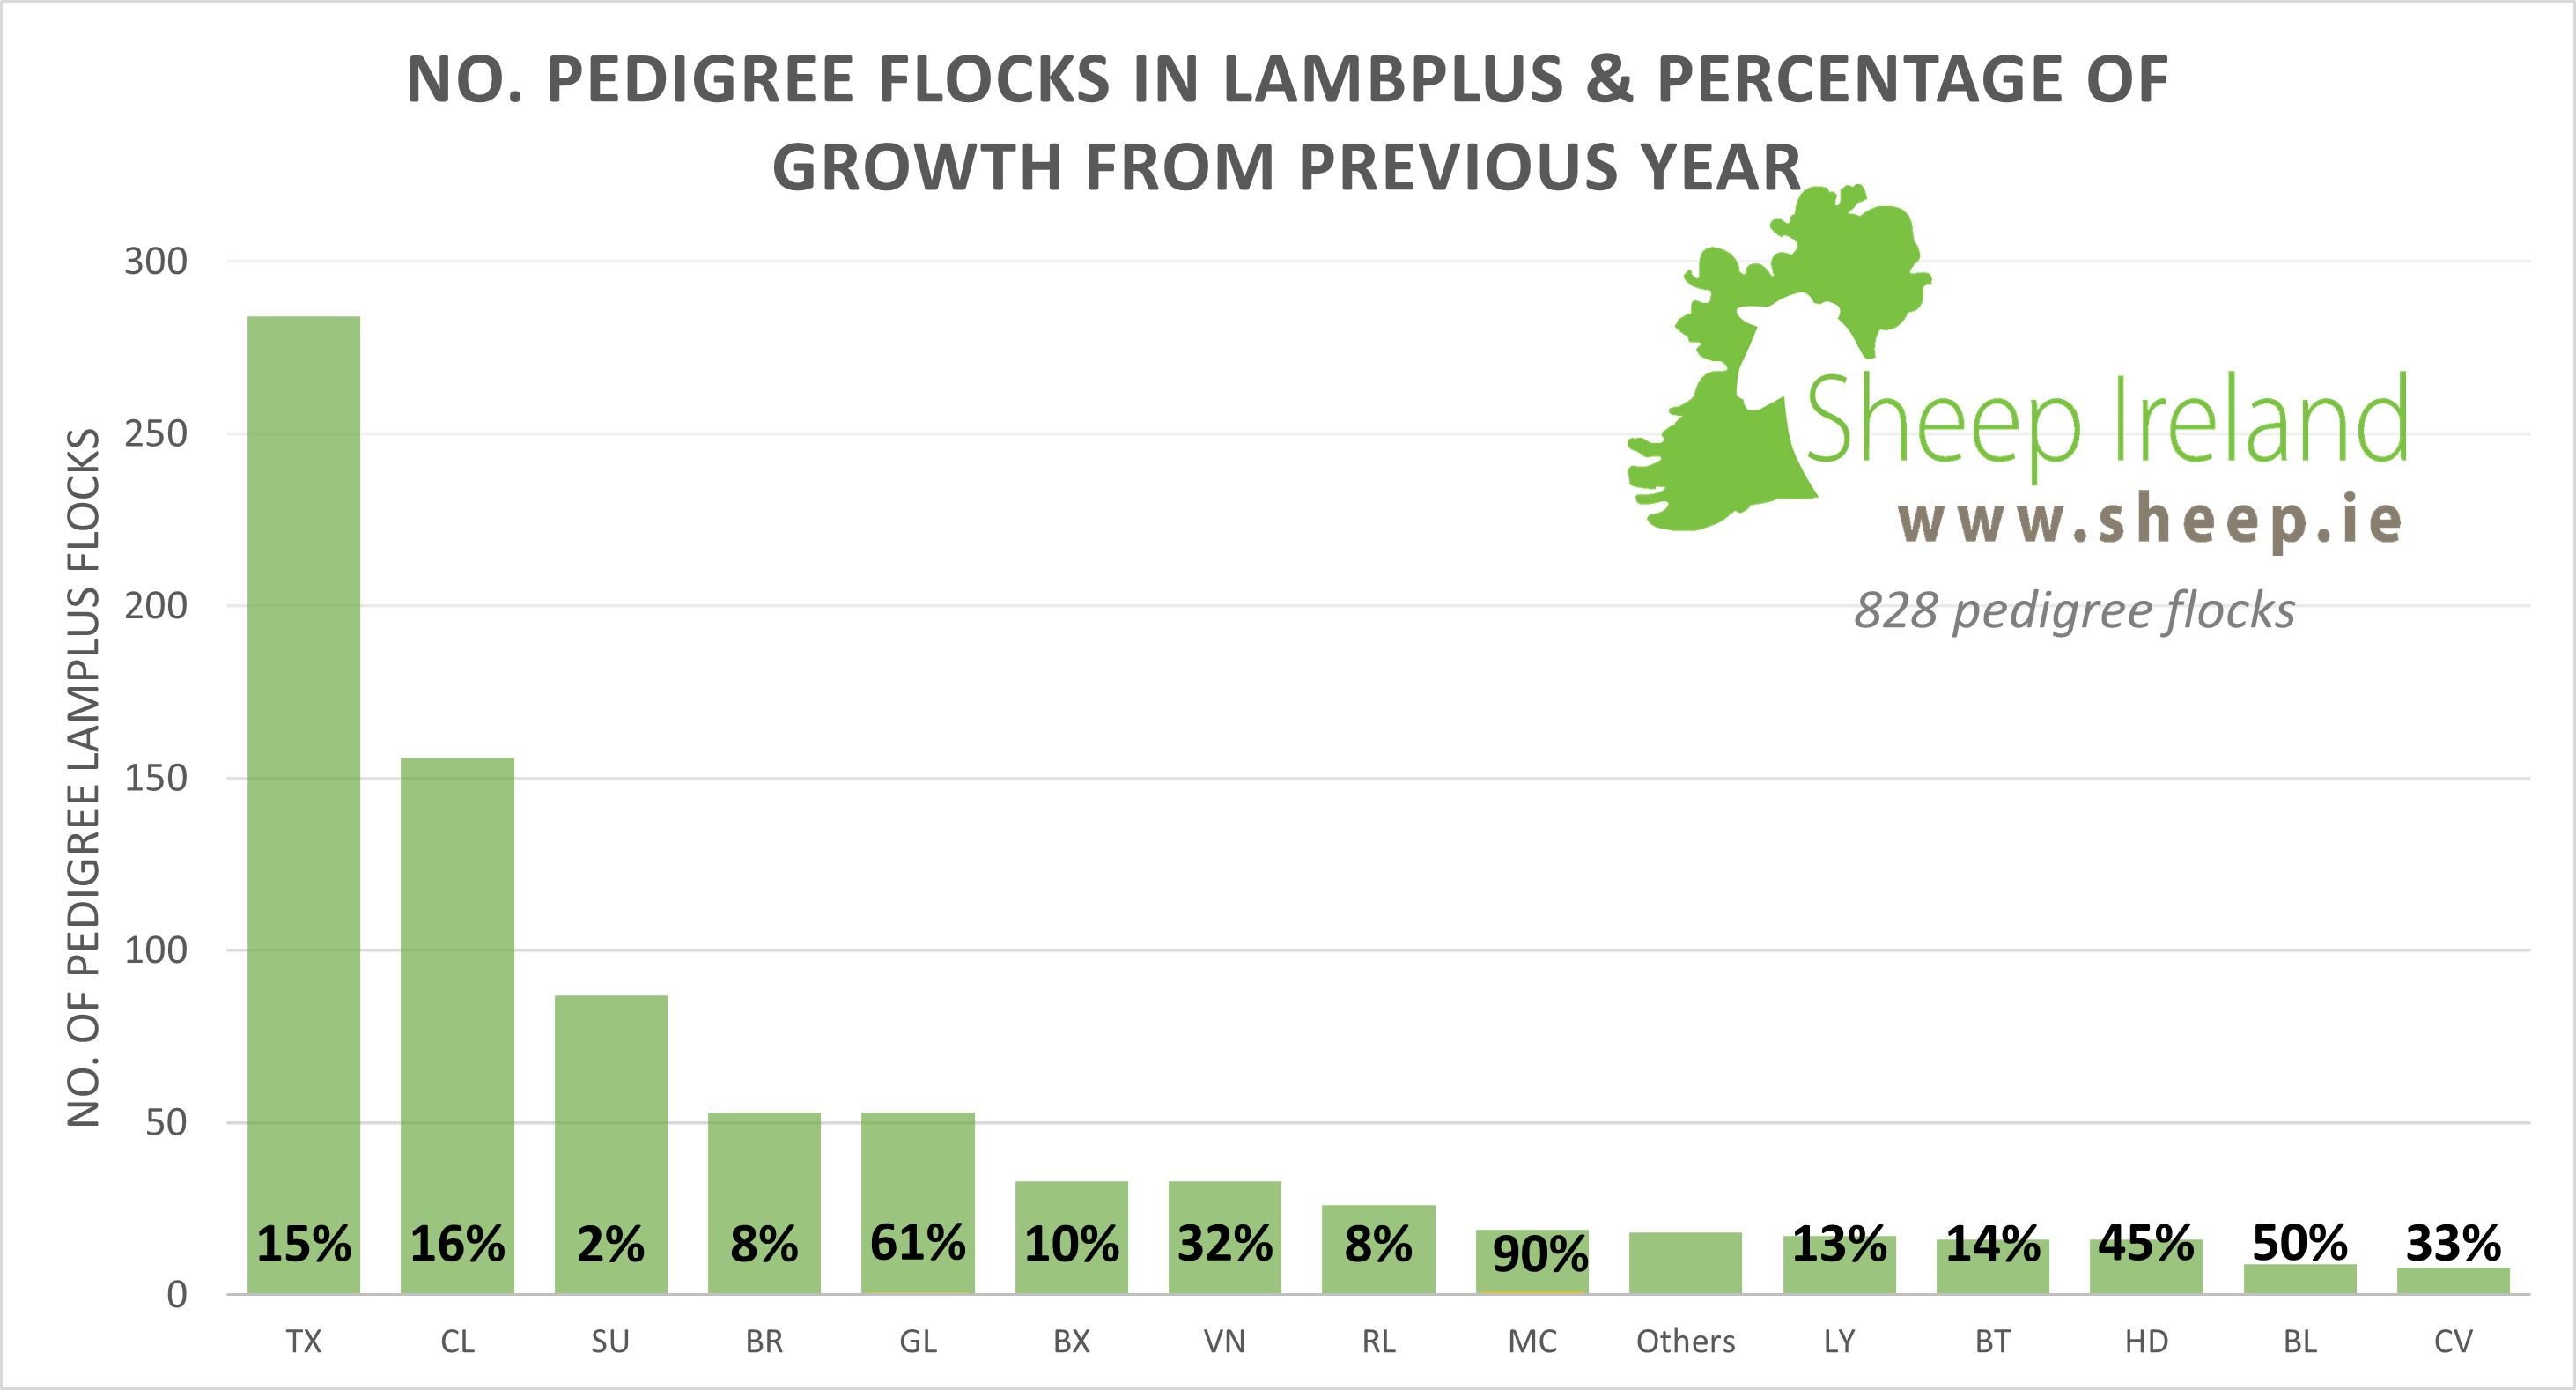 2021 is of to a strong start for LambPlus